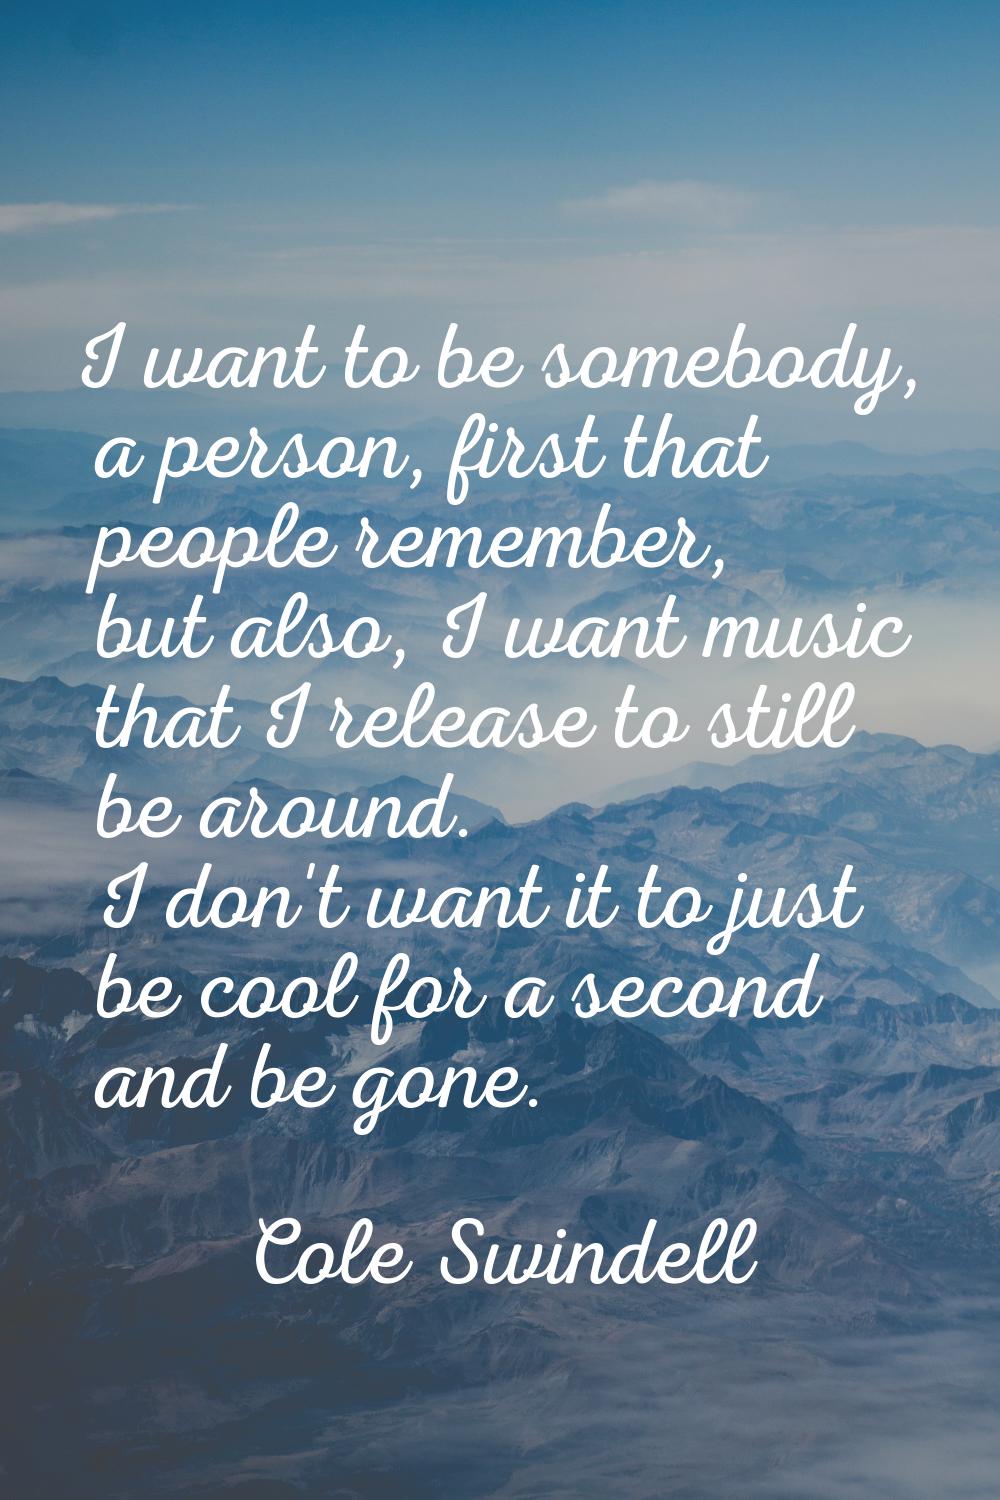 I want to be somebody, a person, first that people remember, but also, I want music that I release 